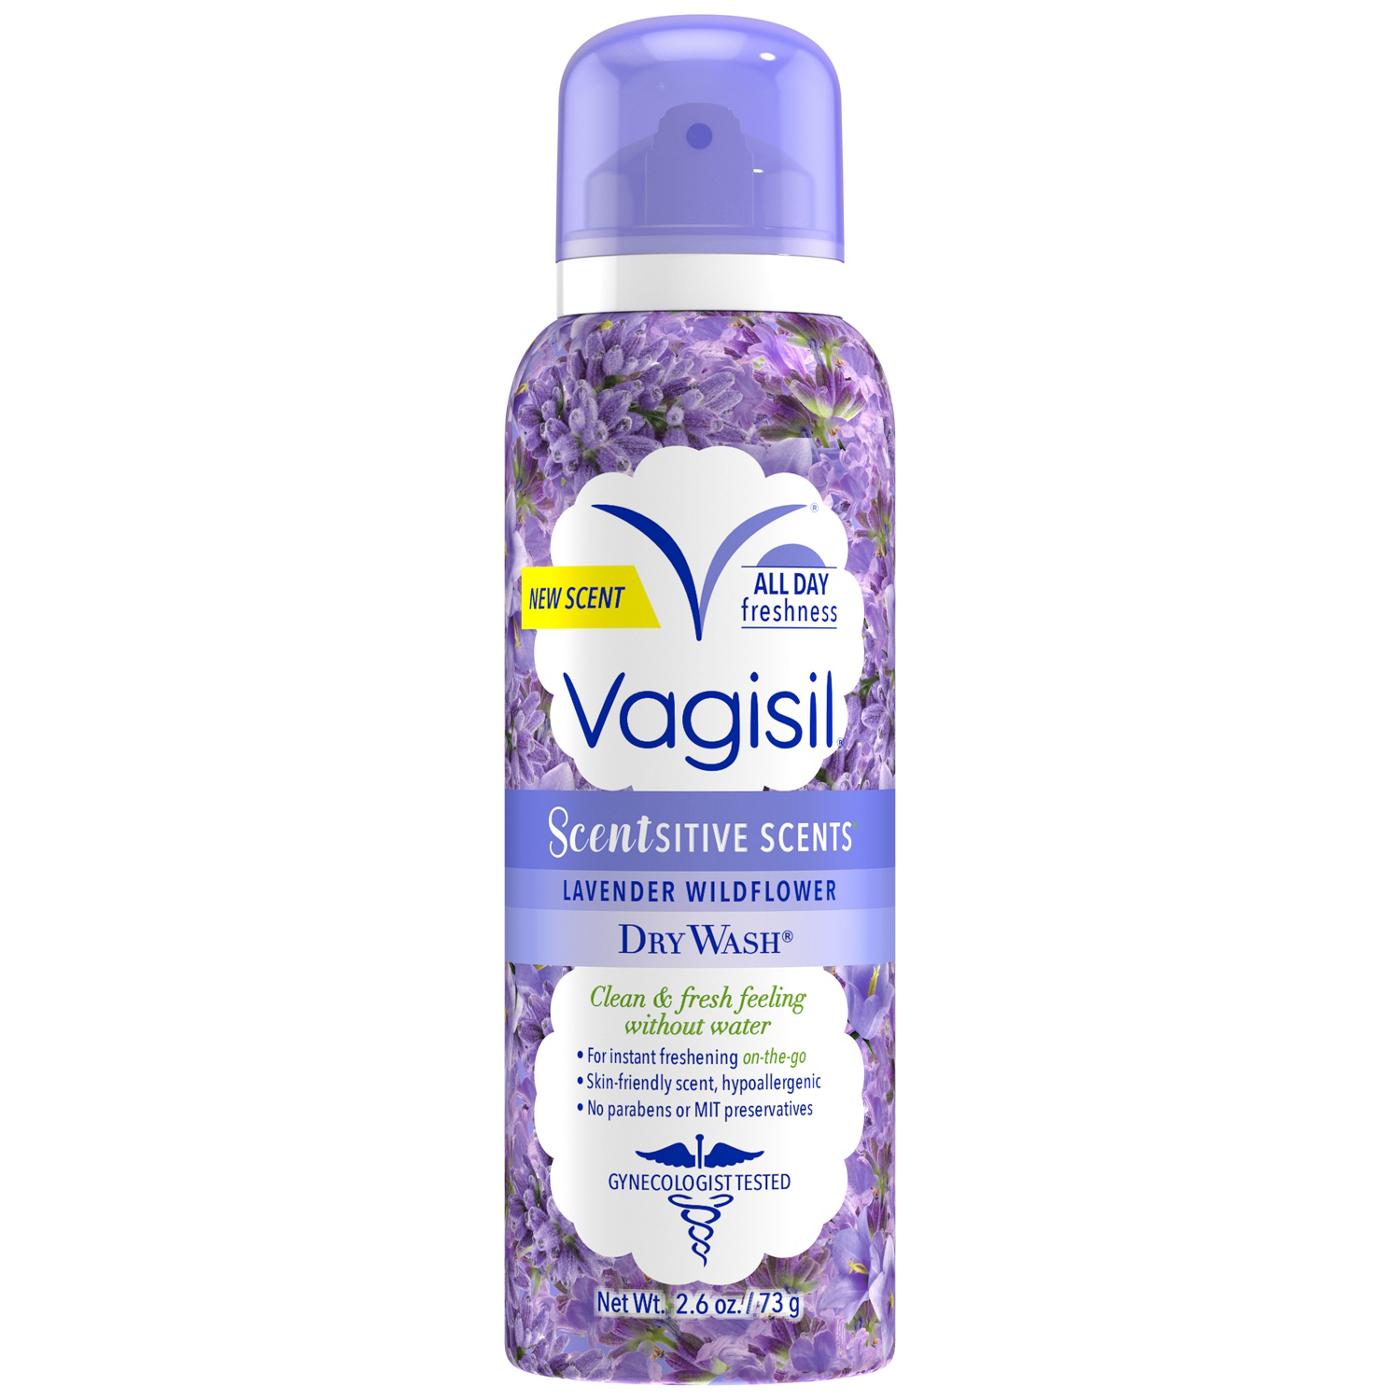 Vagisil Scentsitive Scents Dry Wash - Lavender Wildflower; image 1 of 2